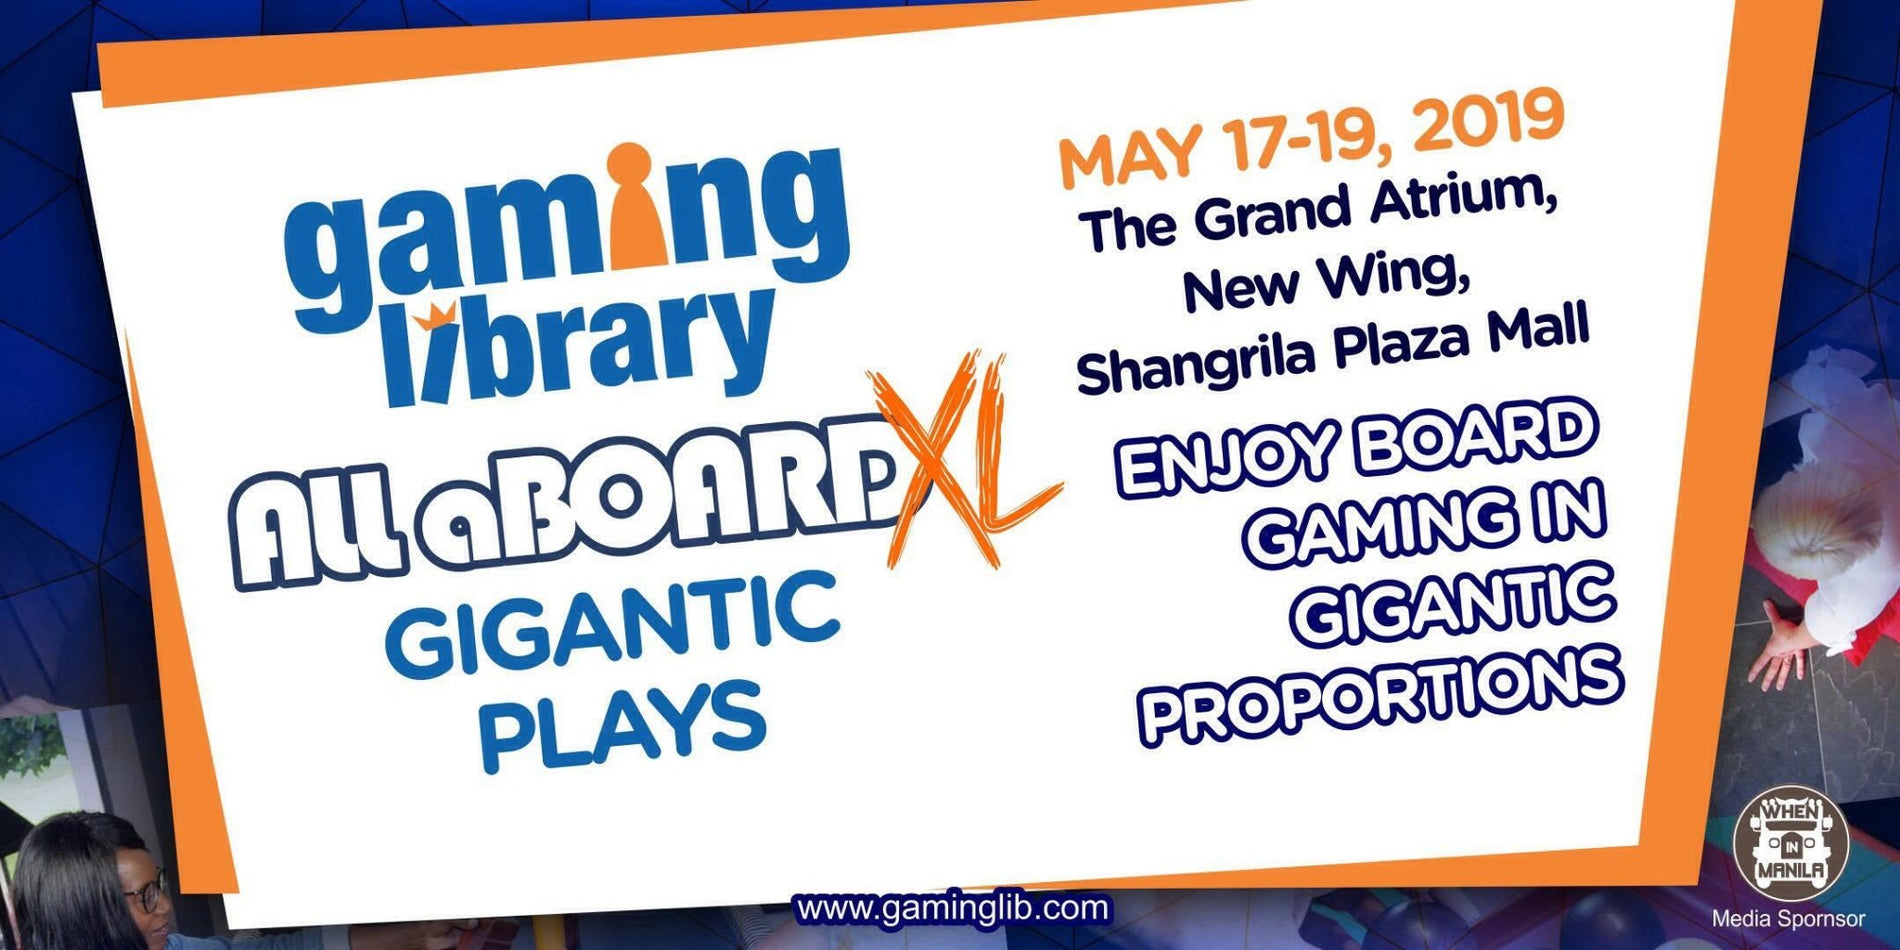 All Aboard XL: Gaming Library Goes Gigantic - Gaming Library